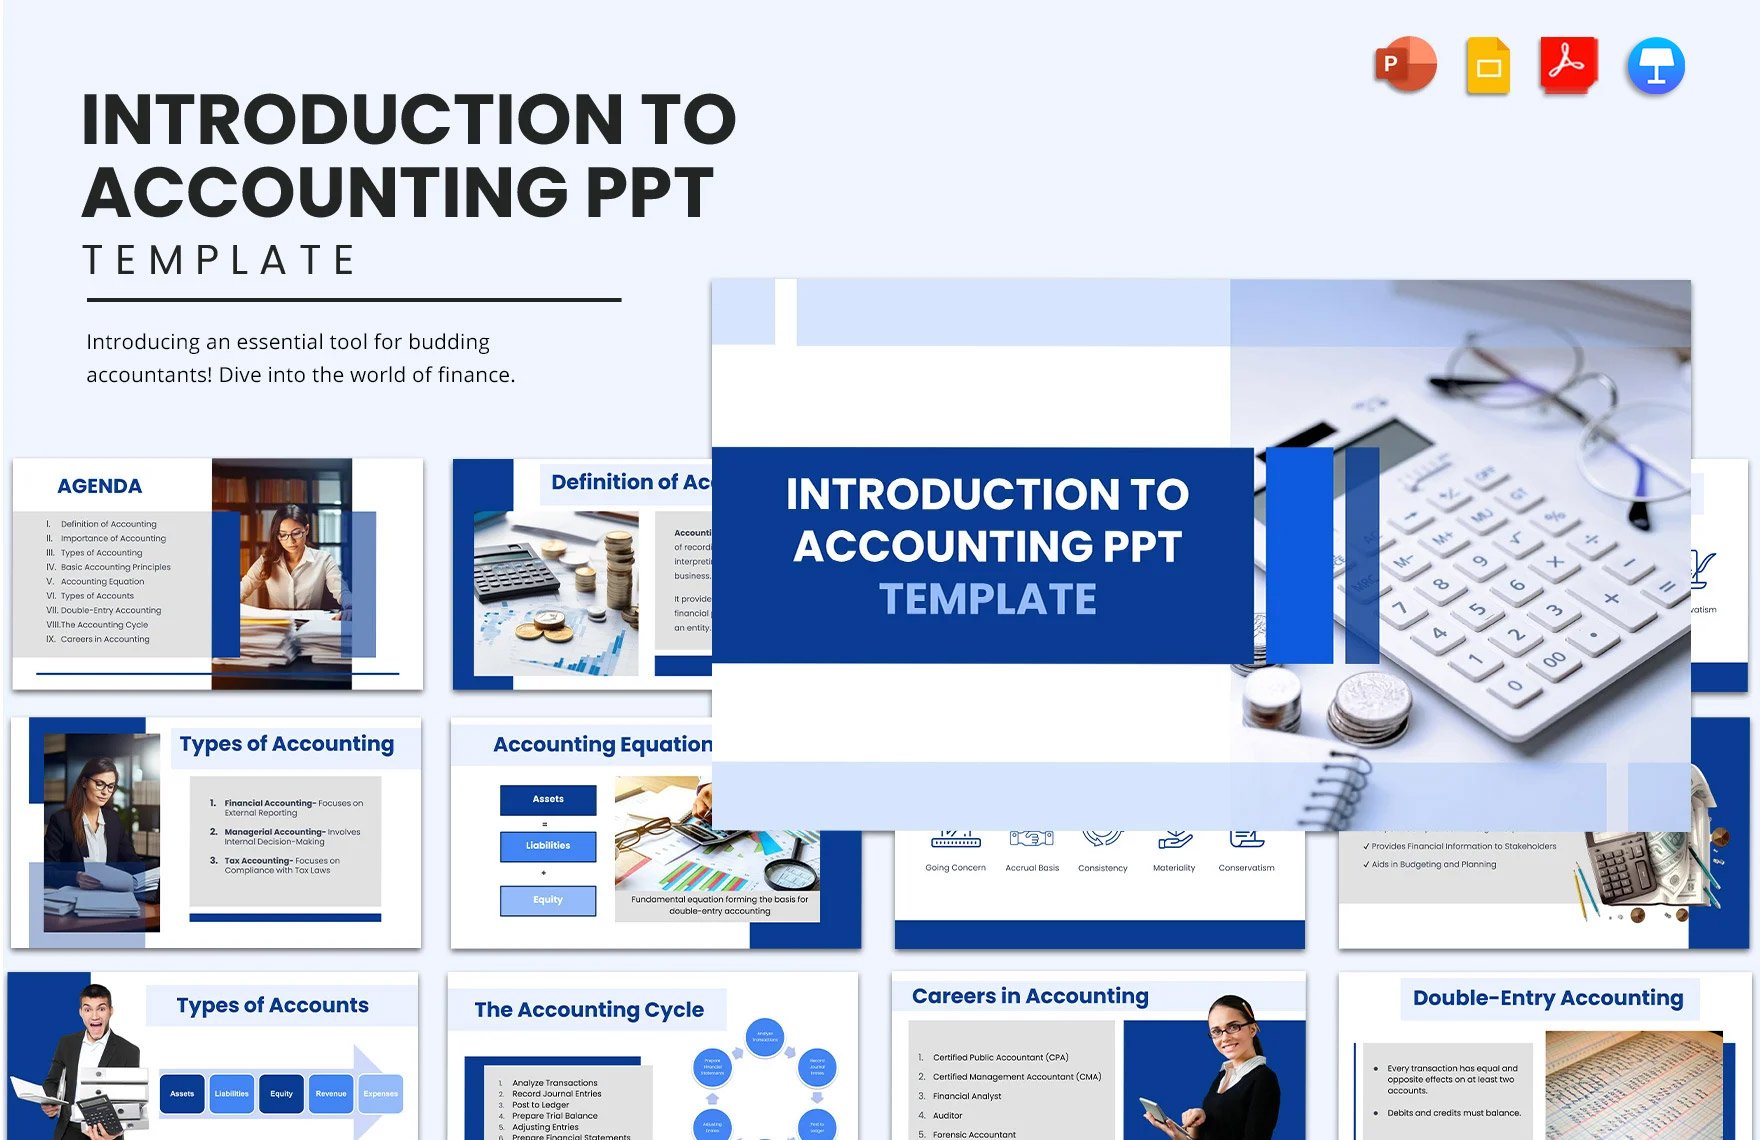 Introduction to Accounting PPT Template in PDF, PowerPoint, Google Slides, Apple Keynote